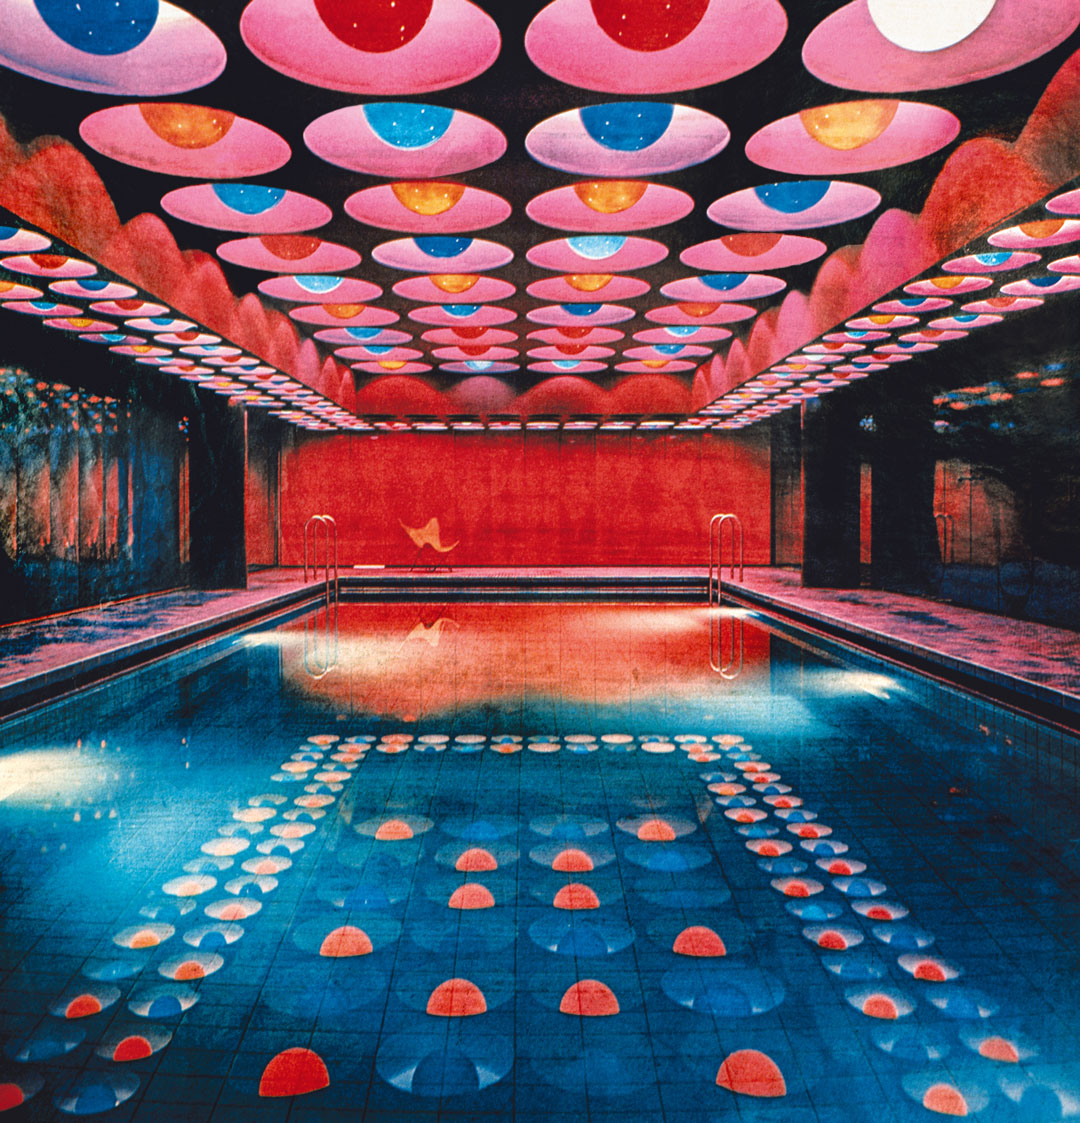 The swimming pool at the Spiegel building (1969) by Verner Panton